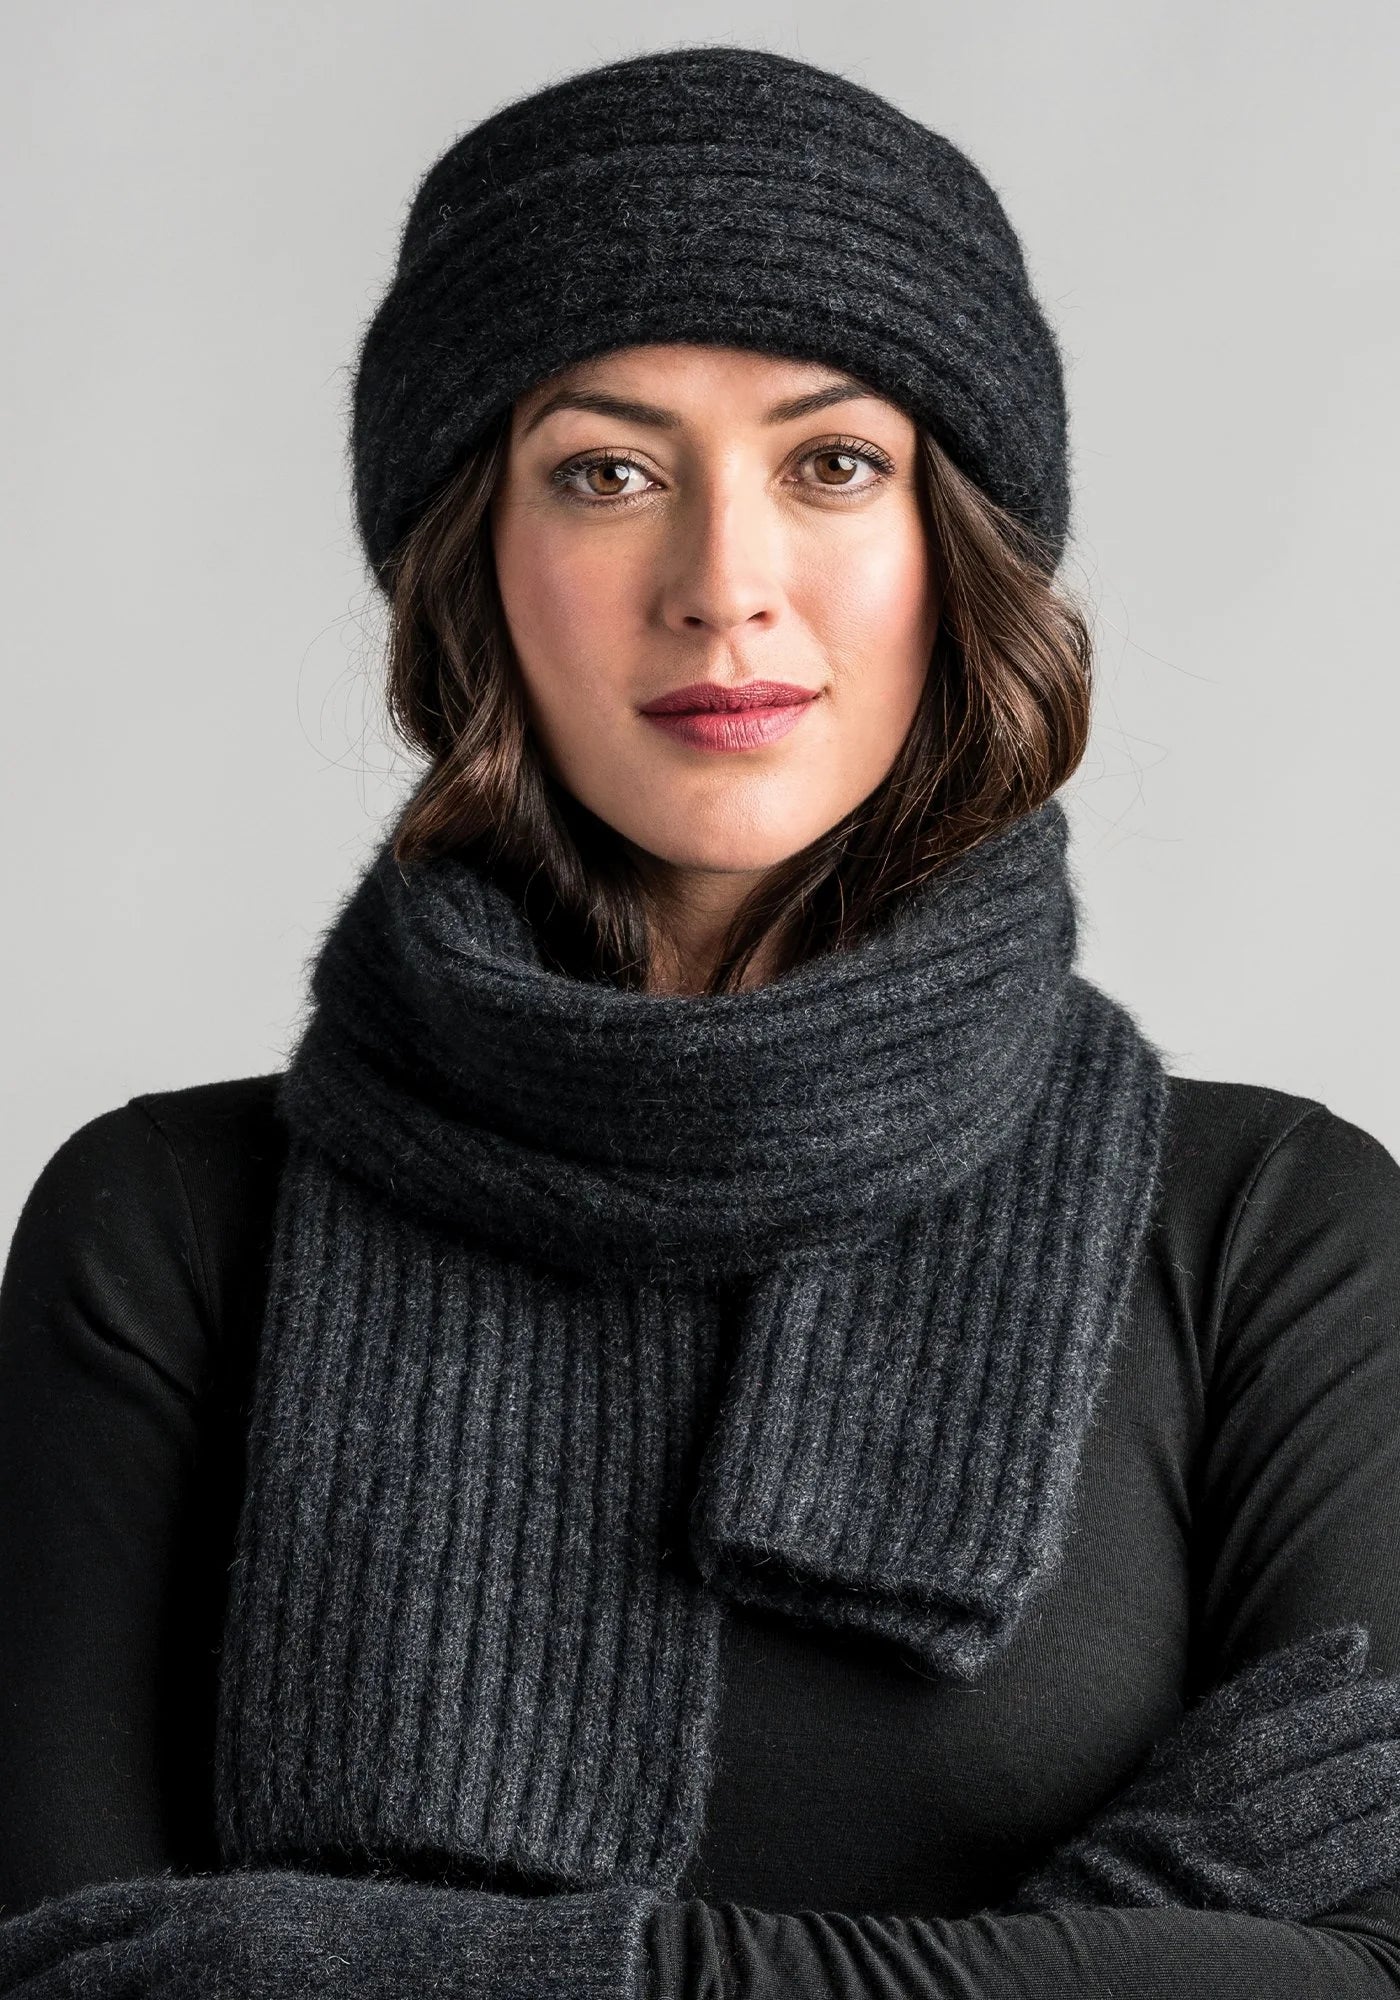 Stay cozy in style with our merino wool beanie—warmth and elegance in every stitch!